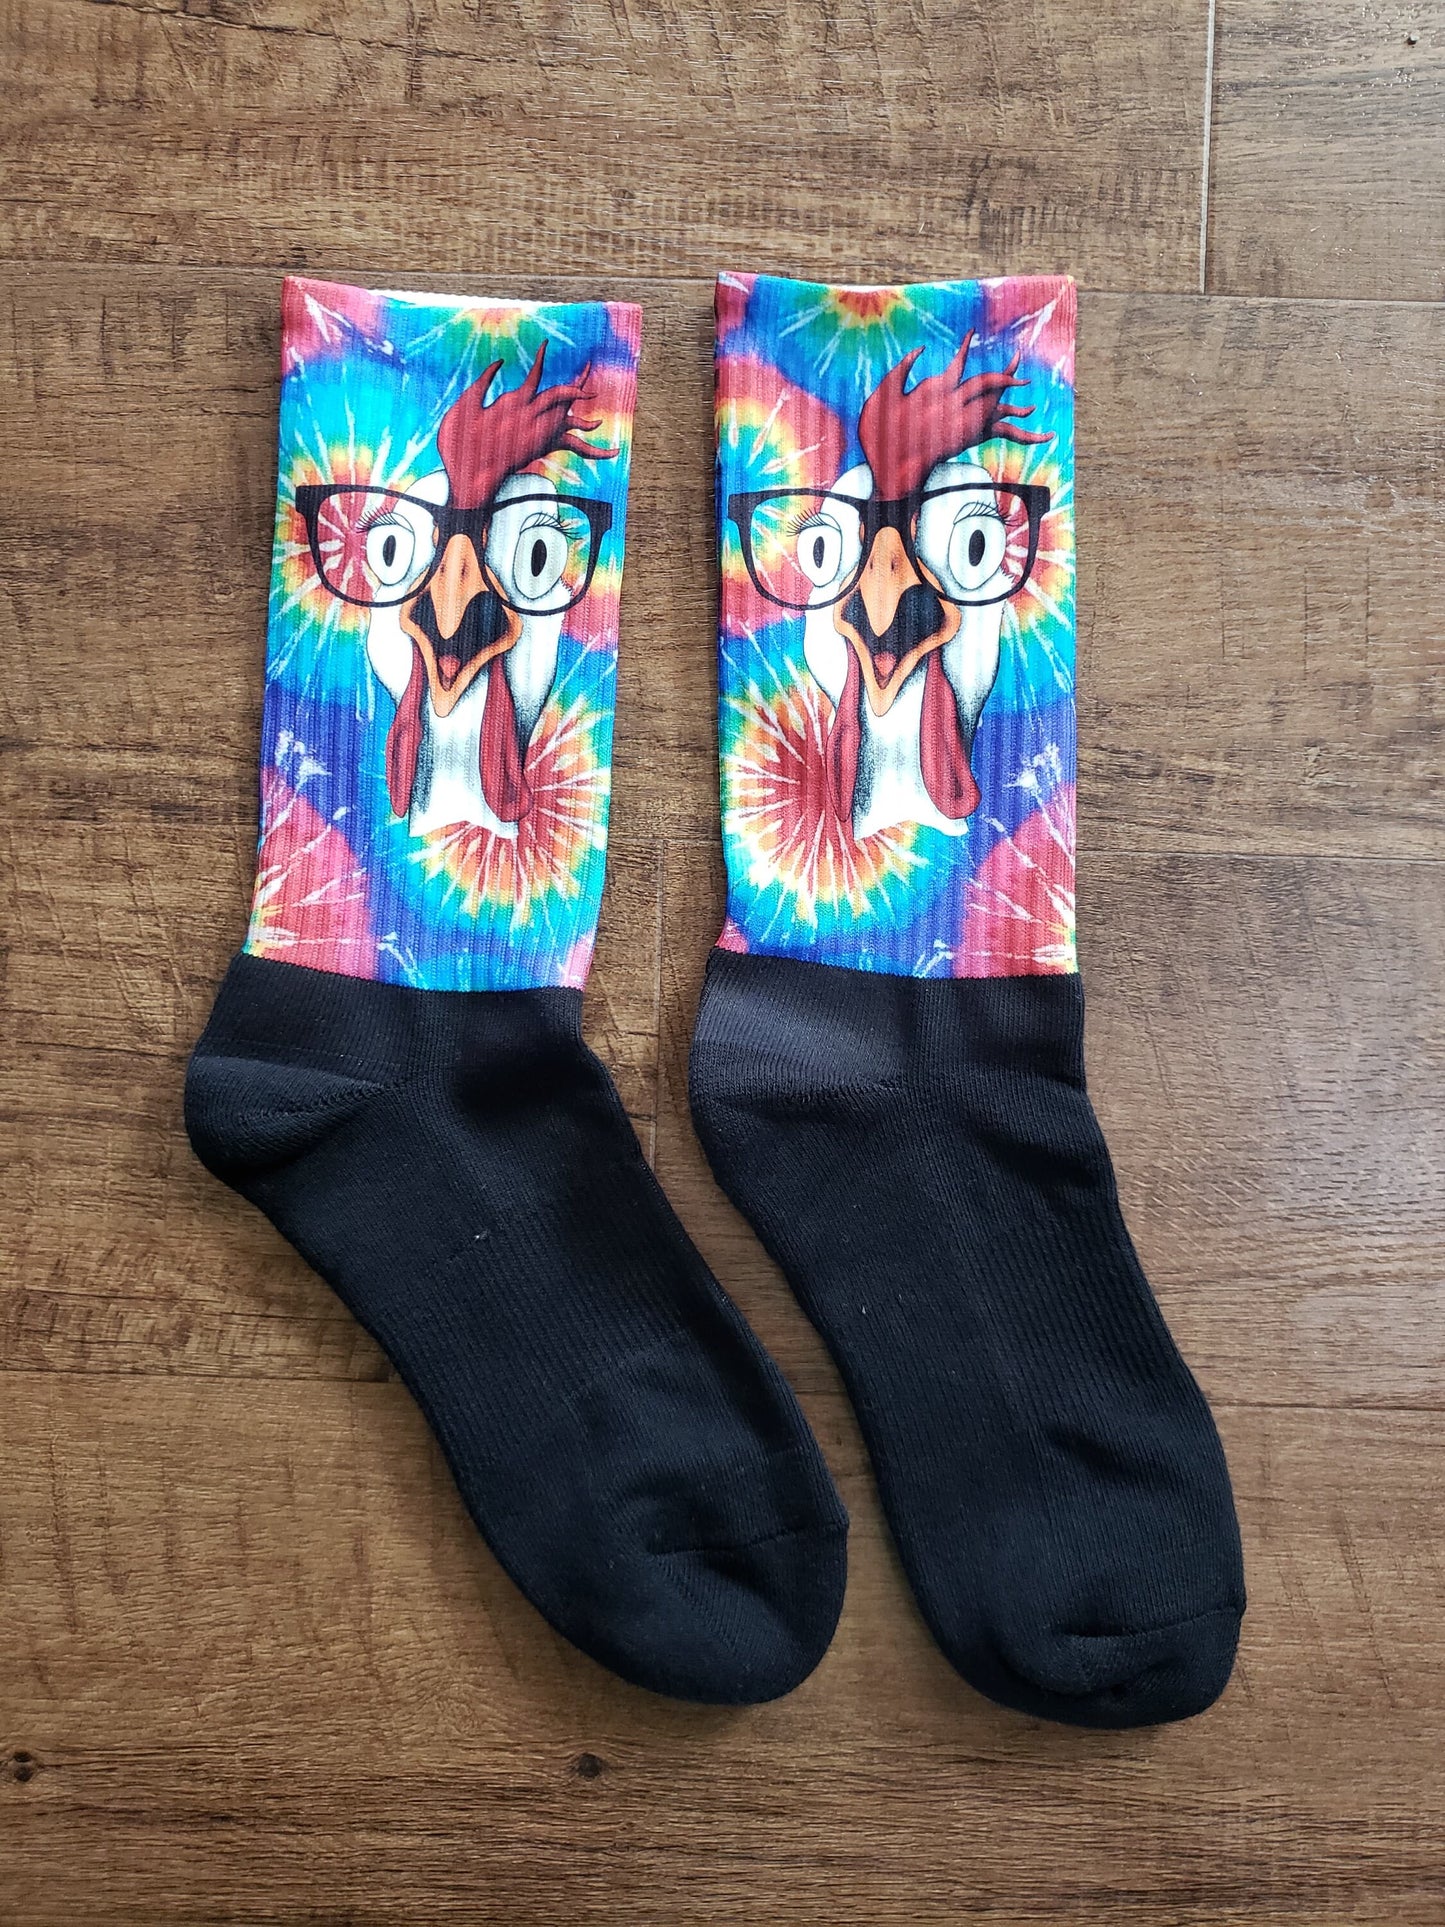 Chicken athletic crew socks. Handcrafted in the USA.